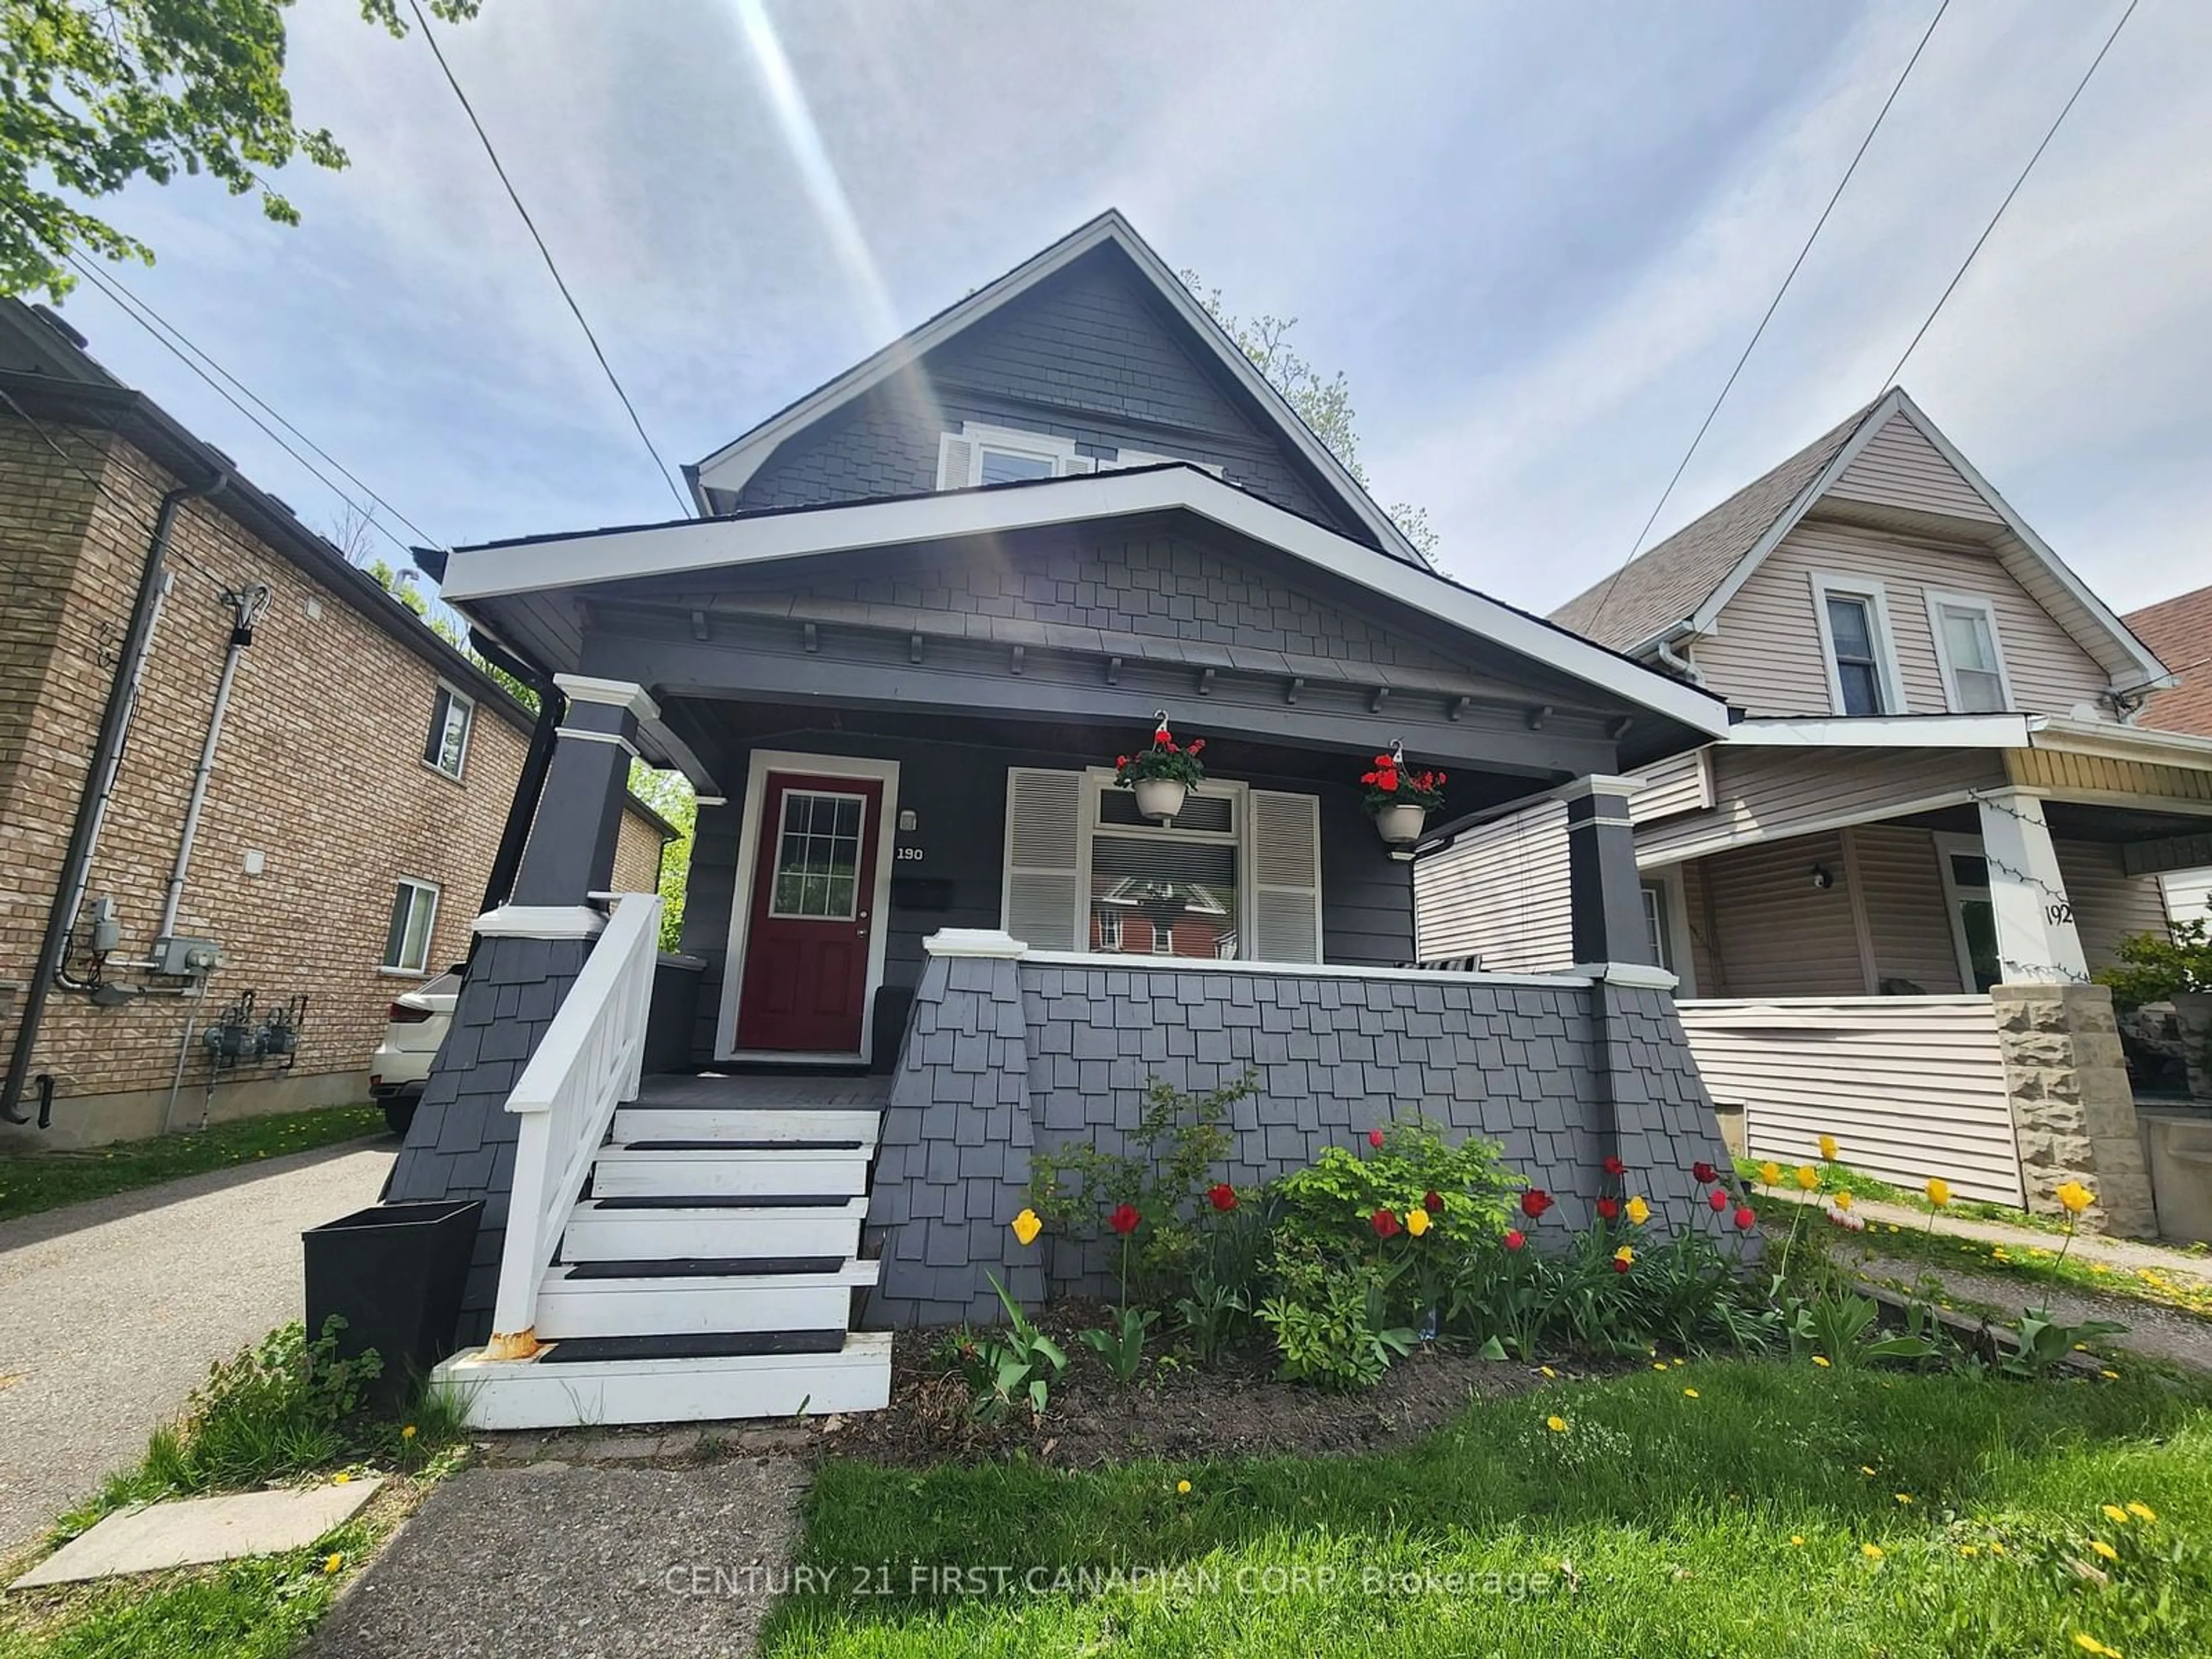 Frontside or backside of a home for 190 Wharncliffe Rd, London Ontario N6H 2B4